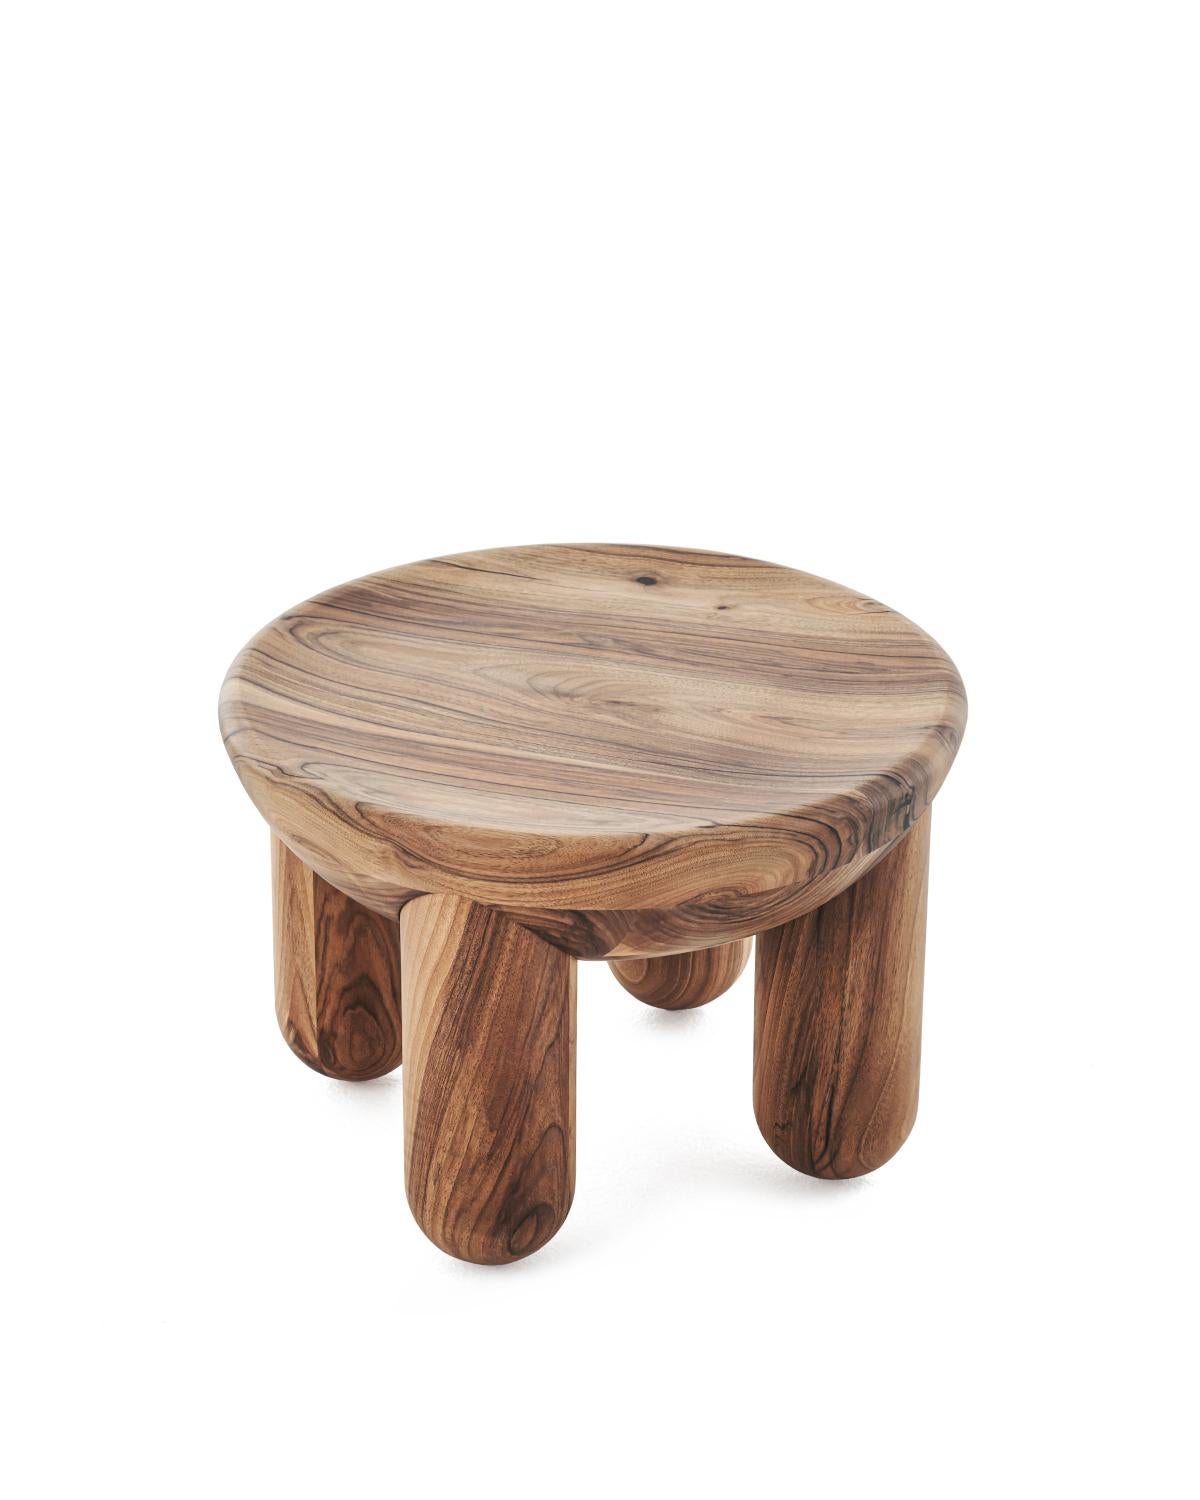 Wooden Coffee Table Freyja 1 in Natural Ash Finish by Noom 11